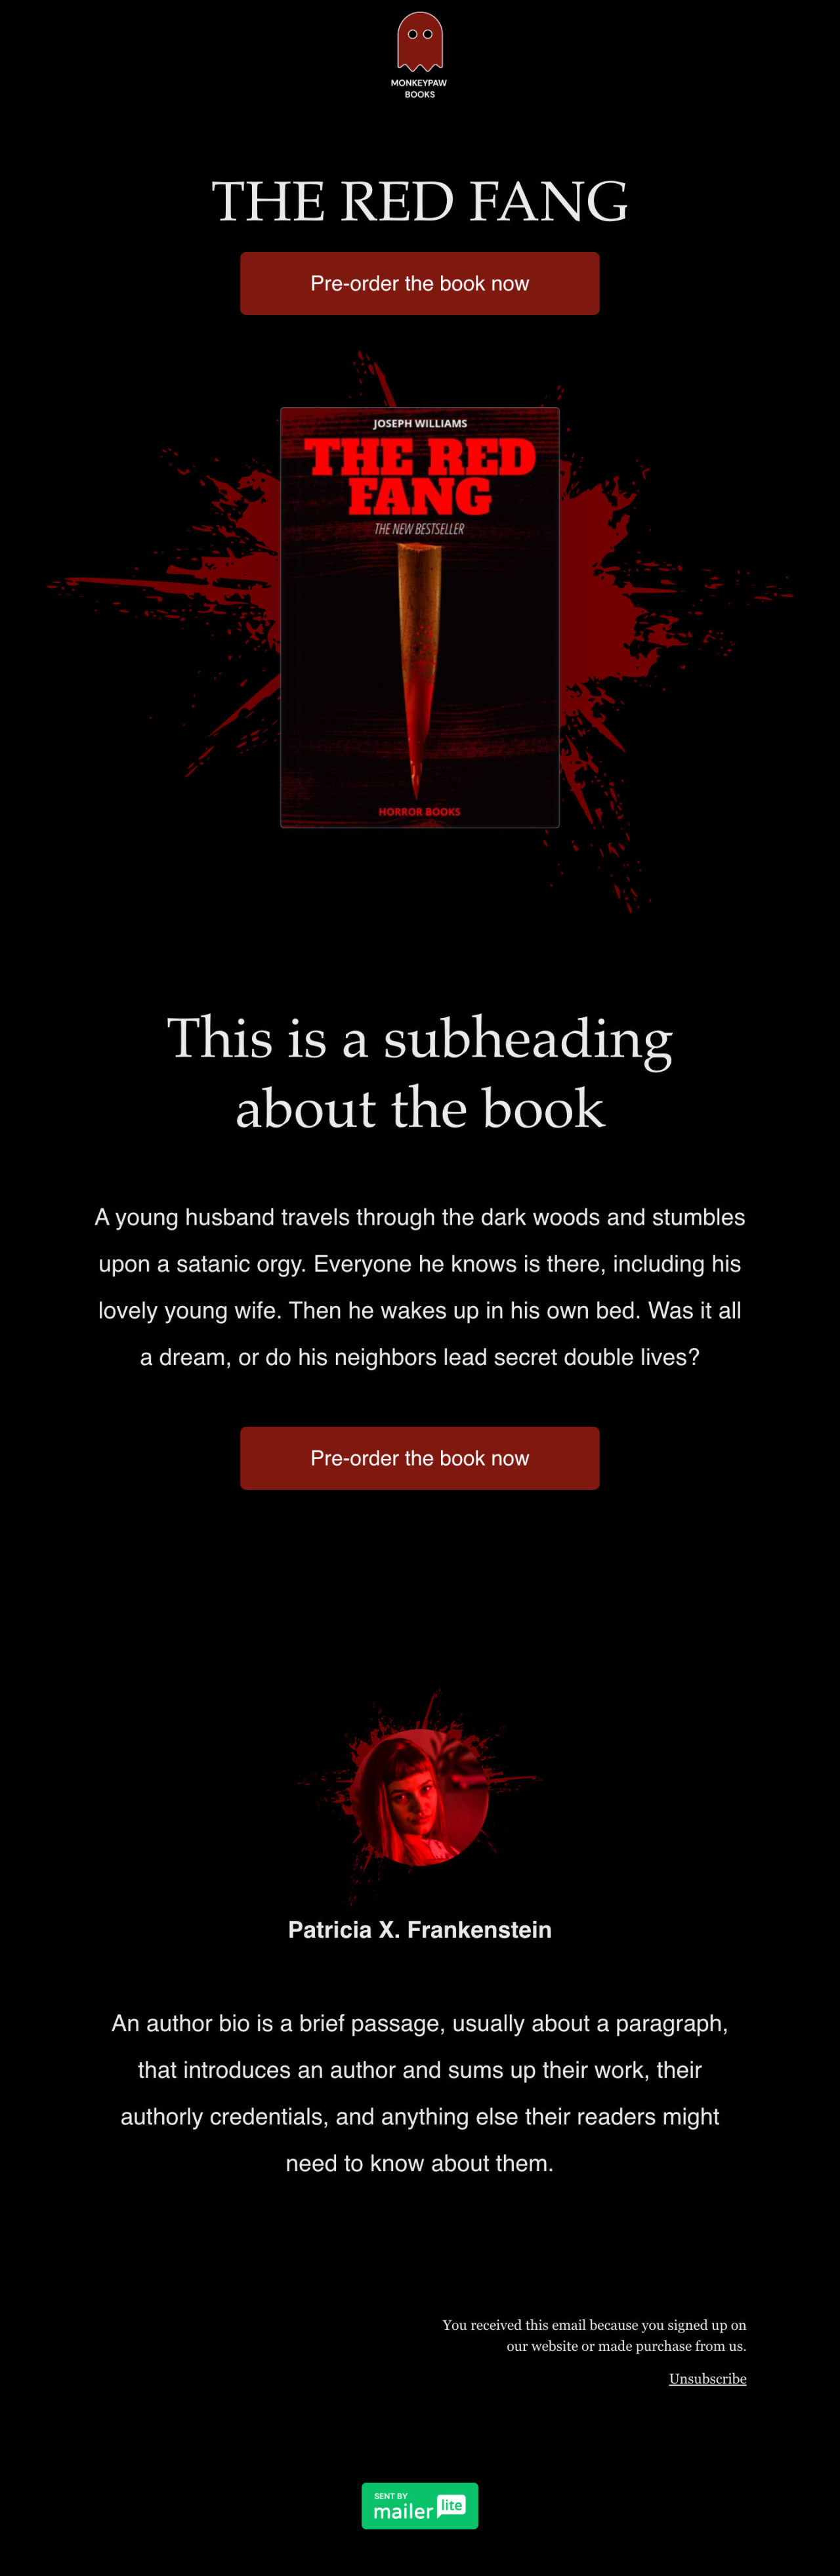 Halloween book launch template - Made by MailerLite